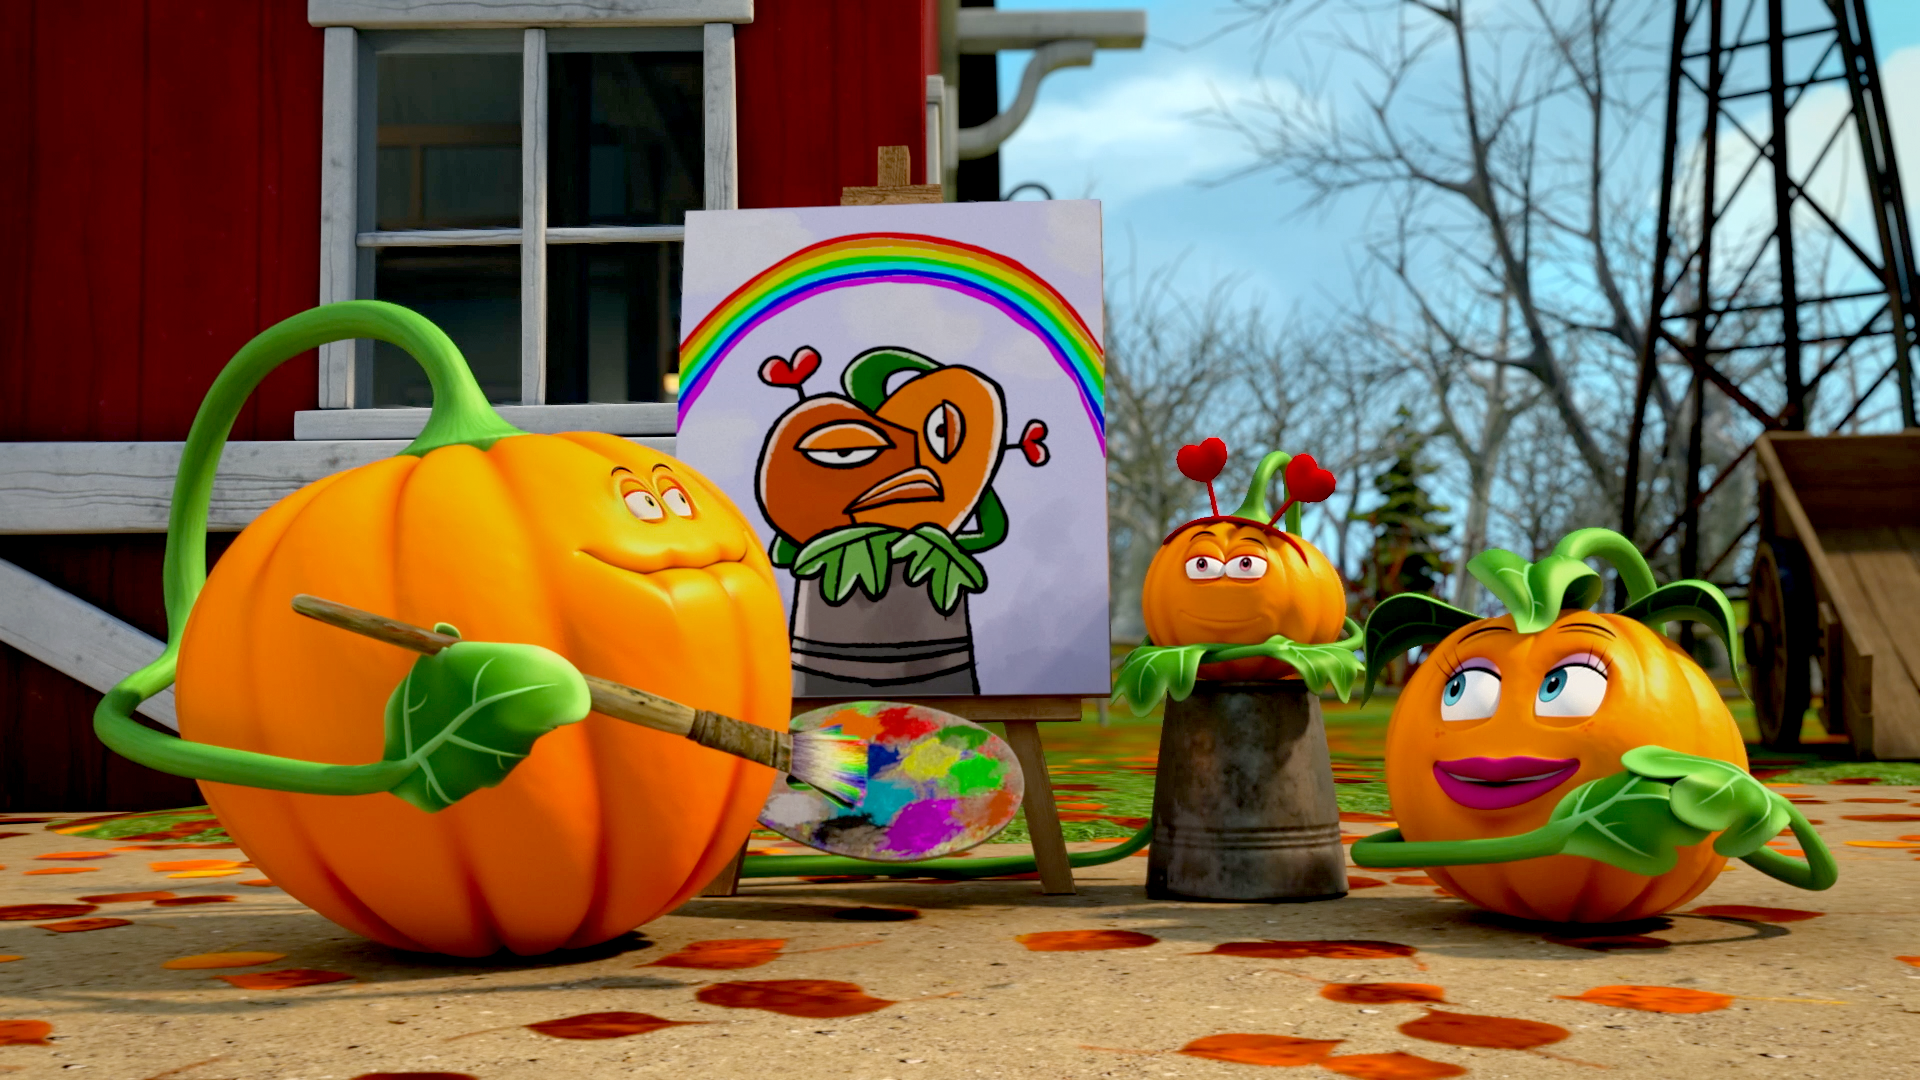 Screencap from "Be Someone's Rainbow" airing on Disney Junior on February 4 and available at DisneyNOW and on Disney Junior's YouTube on February 7.